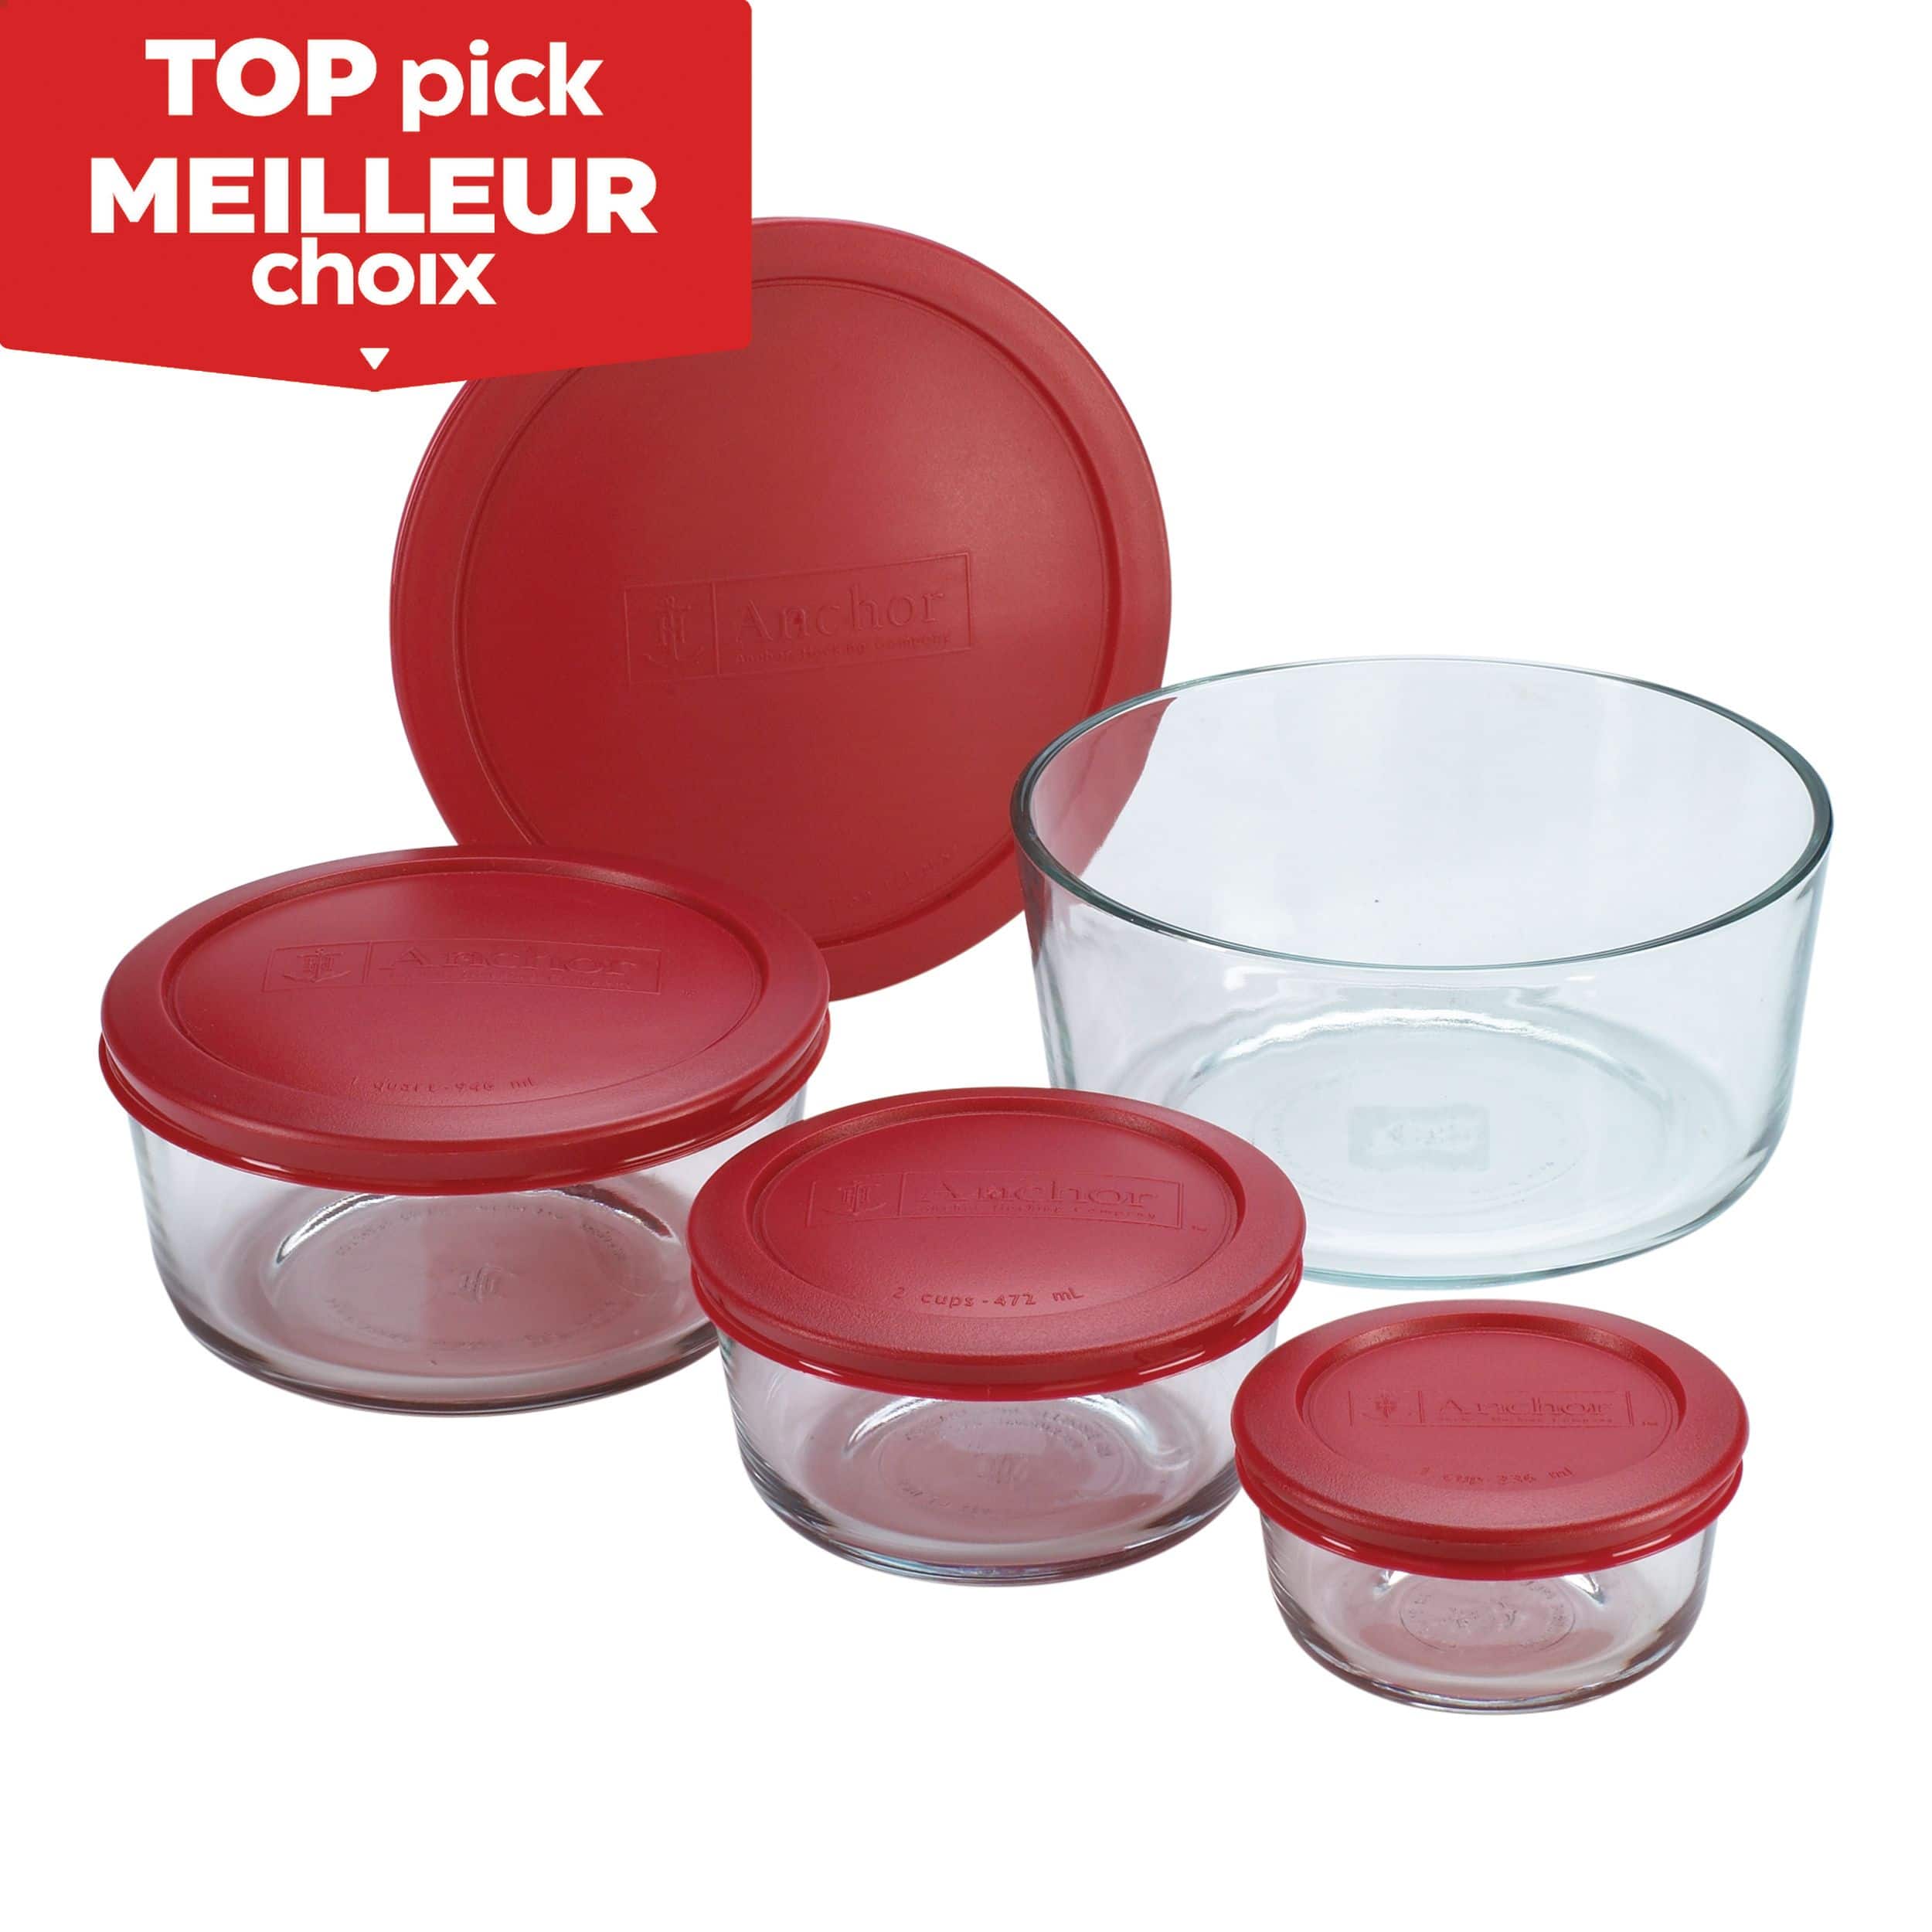 Tupperware 1 COLORED MULTI-PURPOSE NOVELTY GADGET DOUBLE SIDED